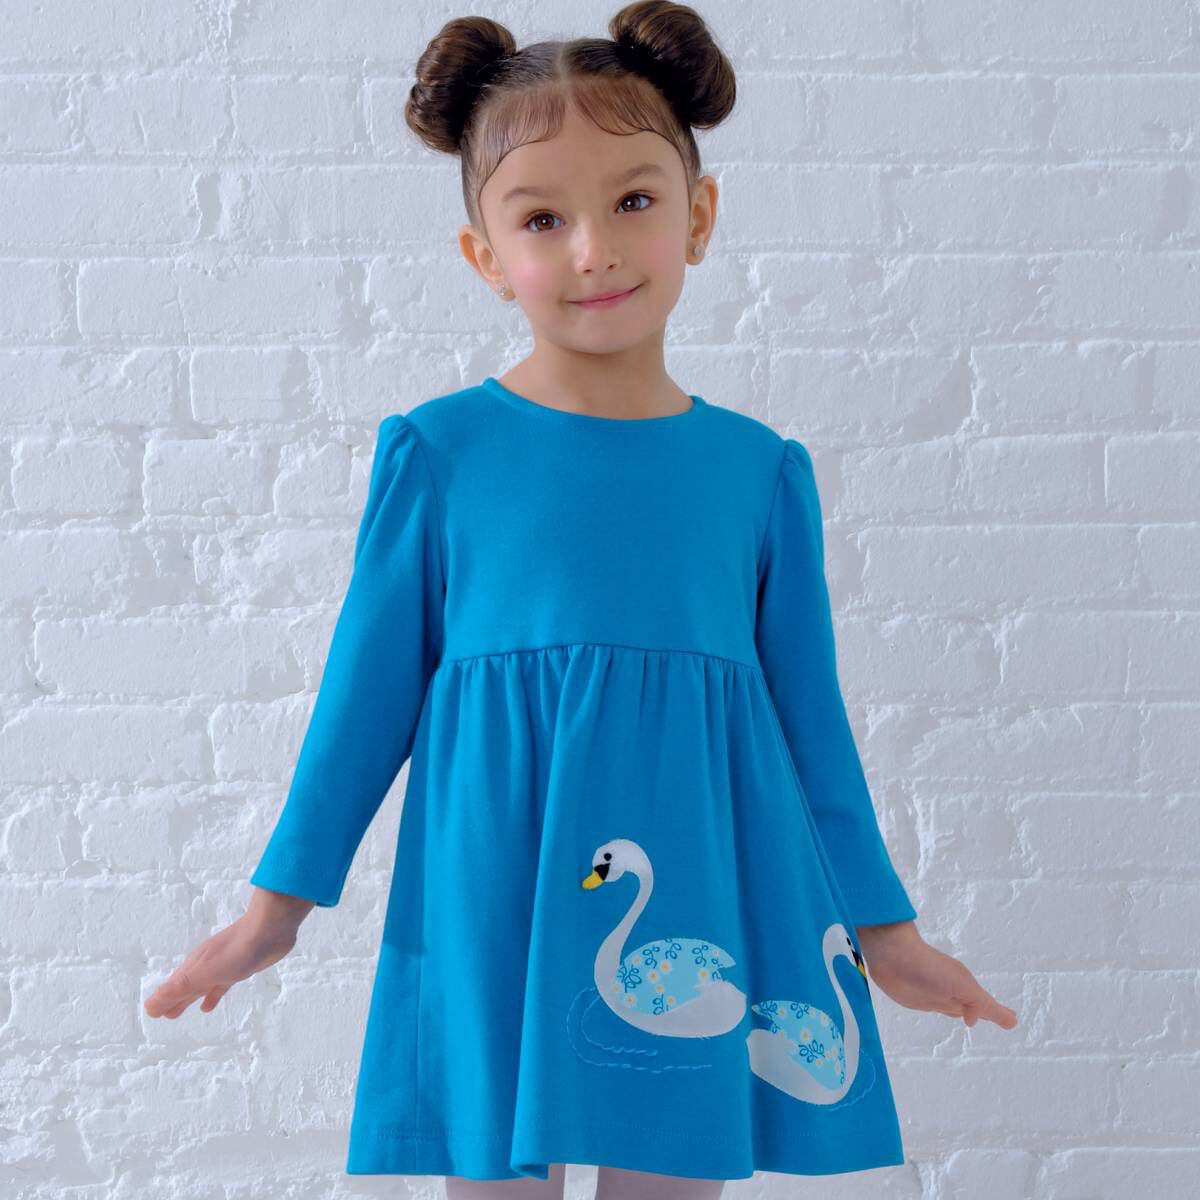 New Look Child's Dress Sewing Pattern N6647 | Hobbycraft